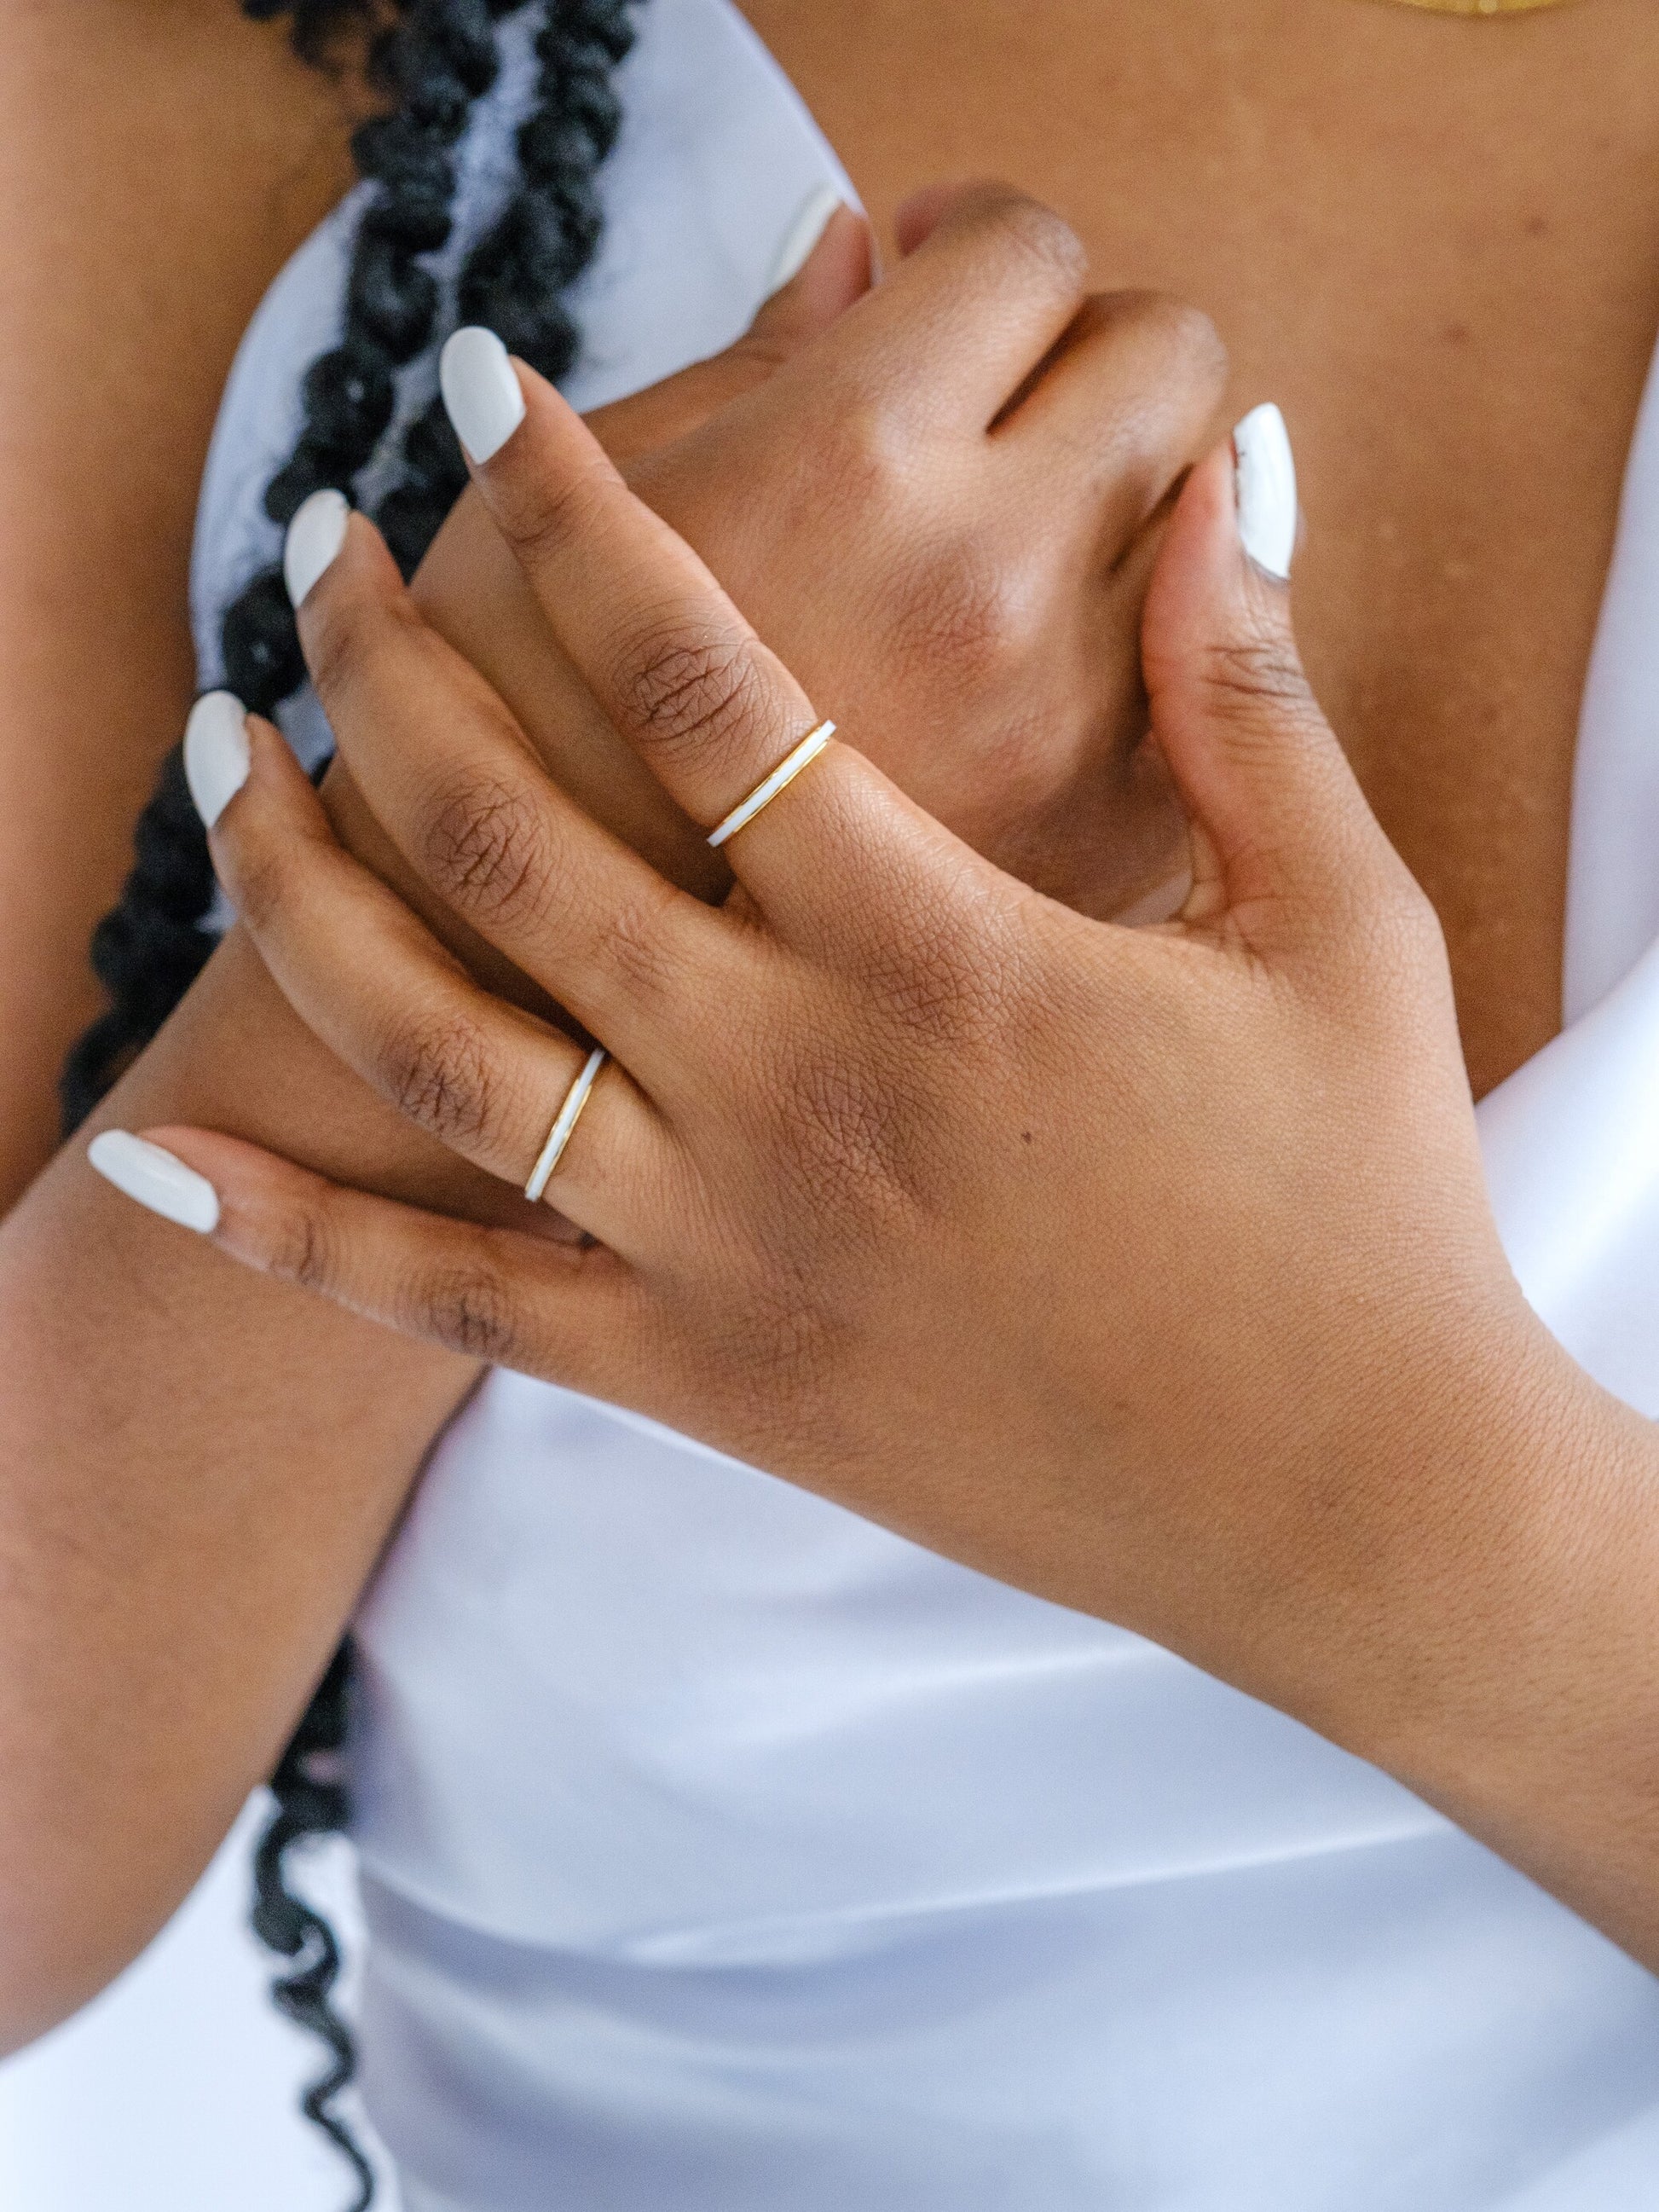 A woman's hand wears two gold band rings with white enamel banding around the middle